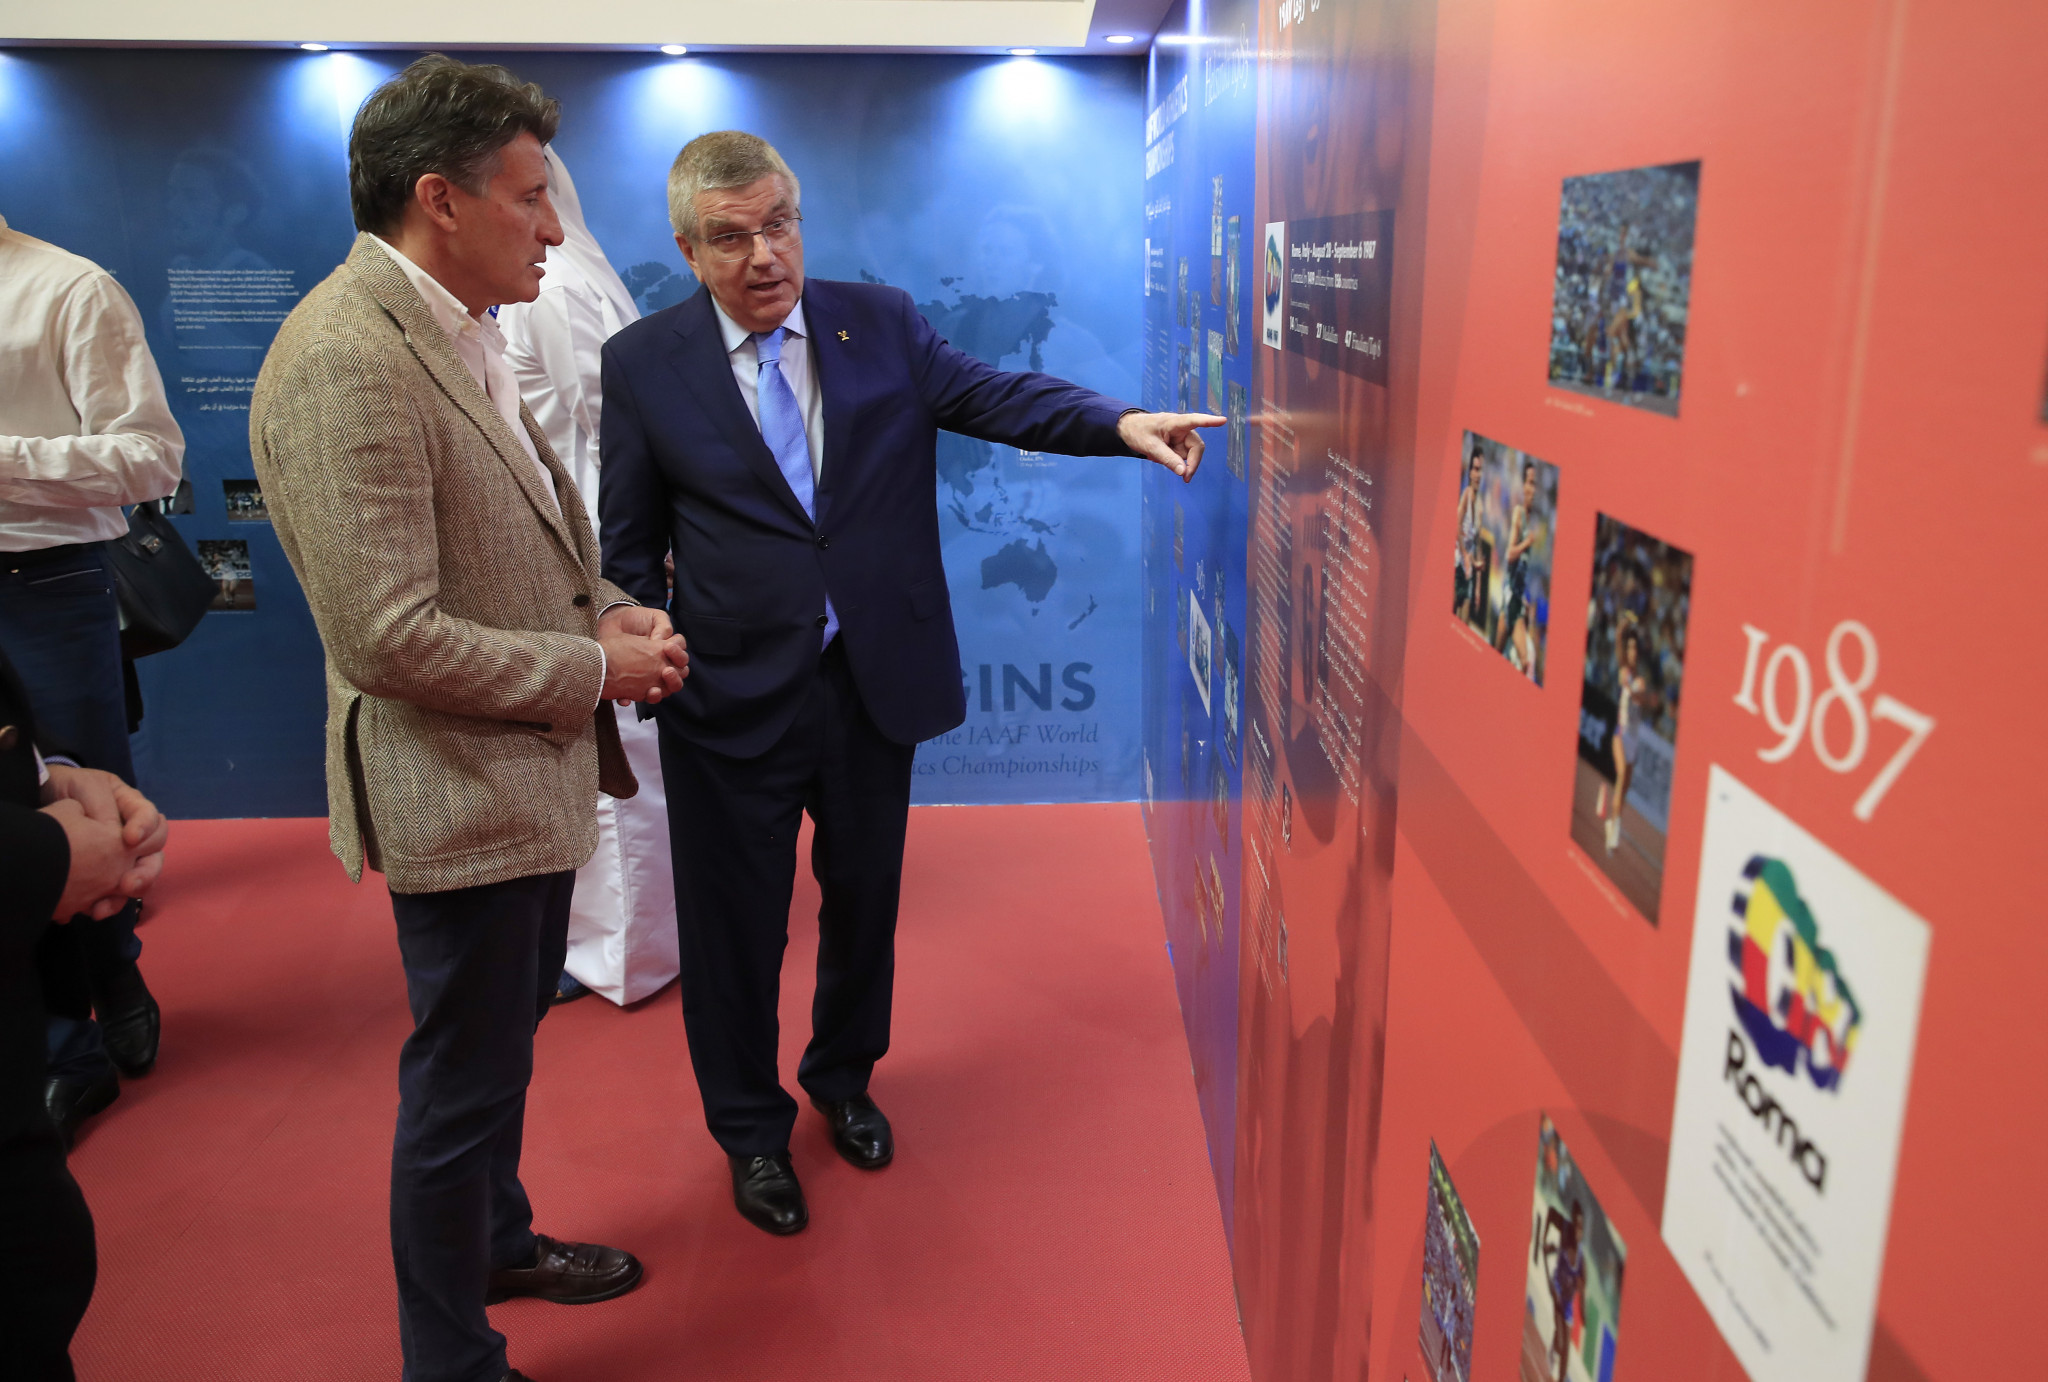 IOC President Thomas Bach visited the IAAF Heritage Exhibition taking place during the World Championships in Doha and was accompanied by Sebastian Coe ©Getty Images